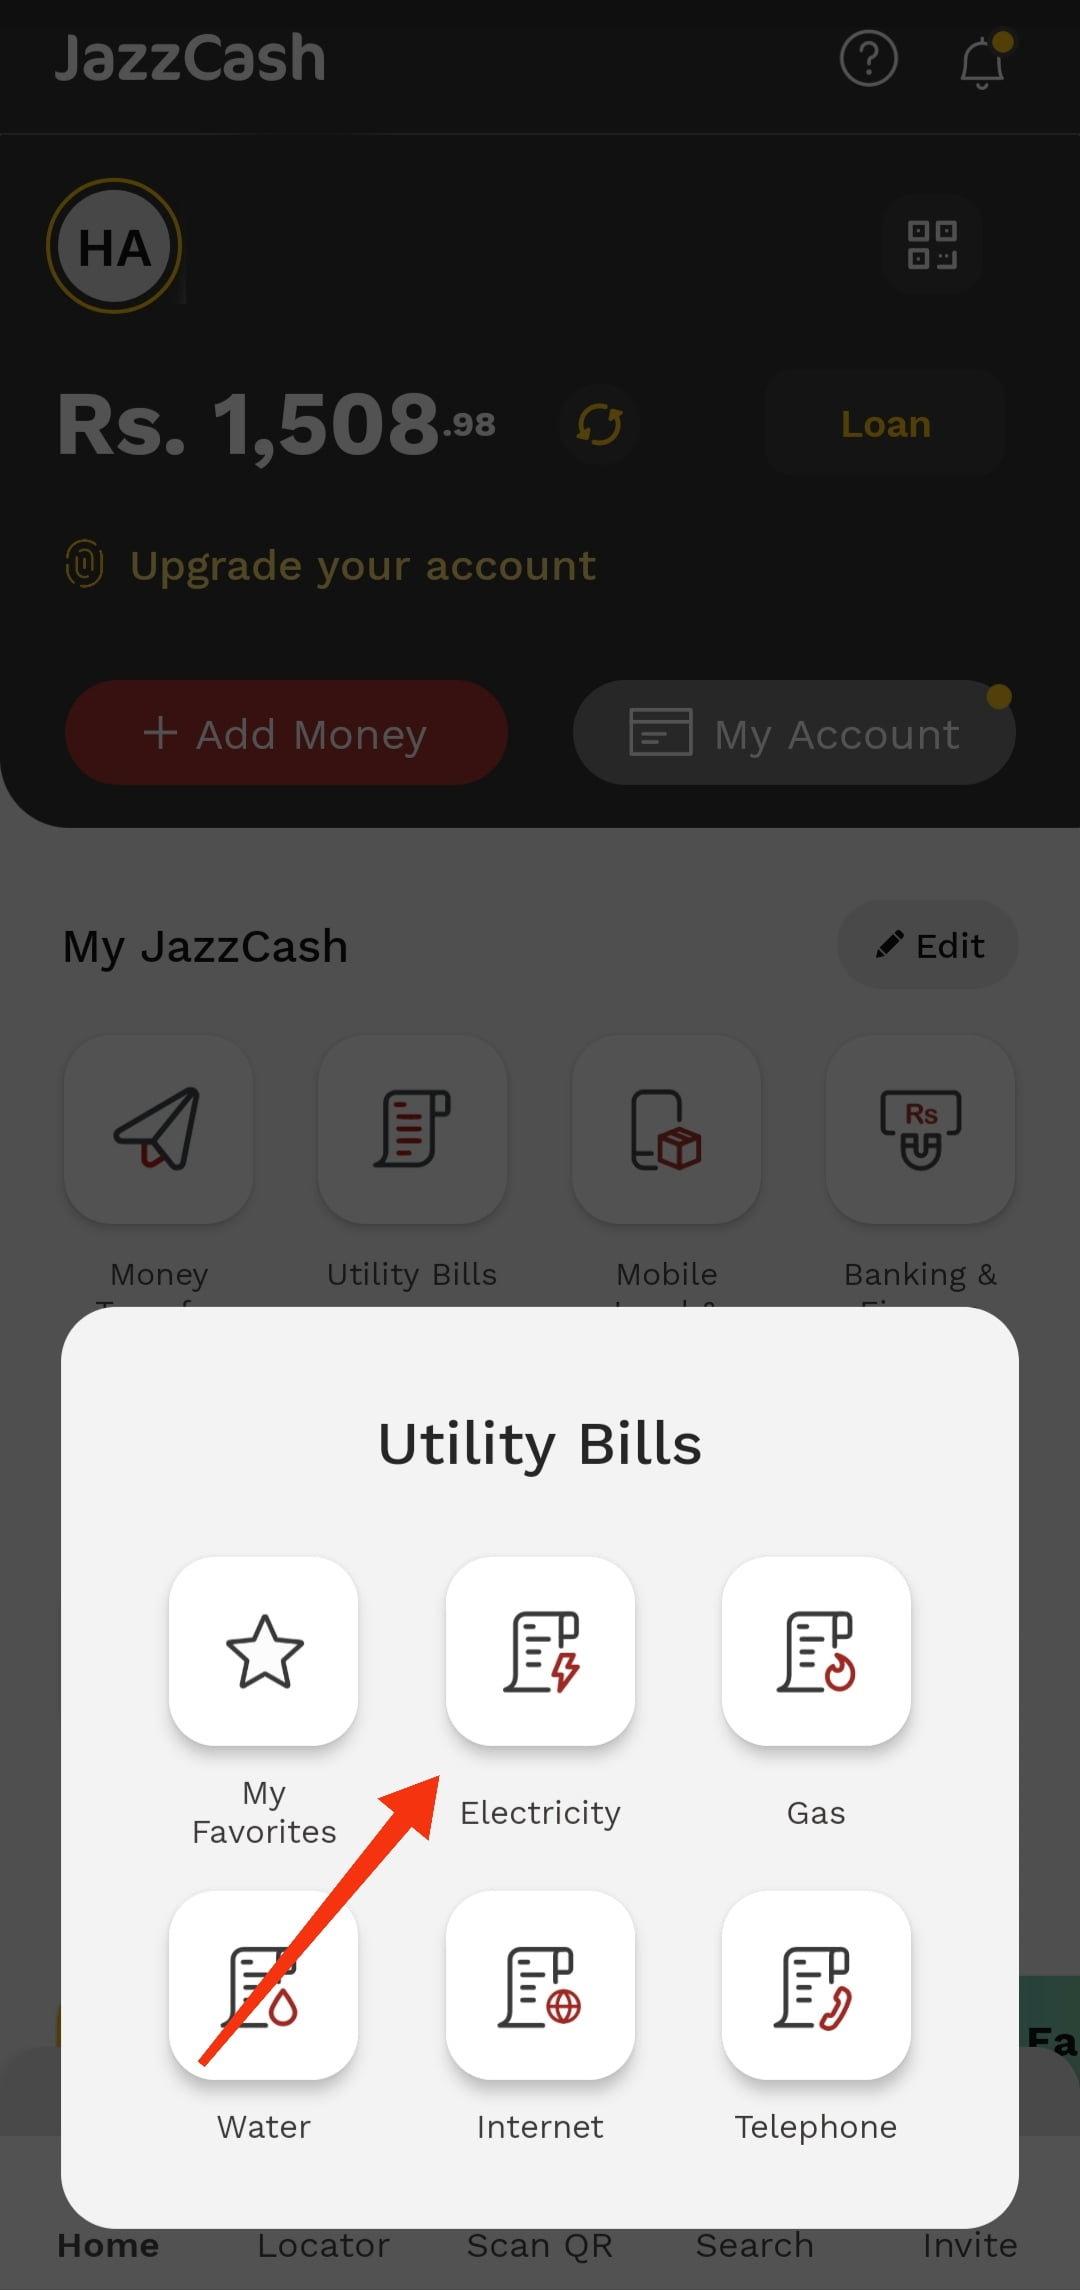 MEPCO Bill Pay Online With Jazz Cash App